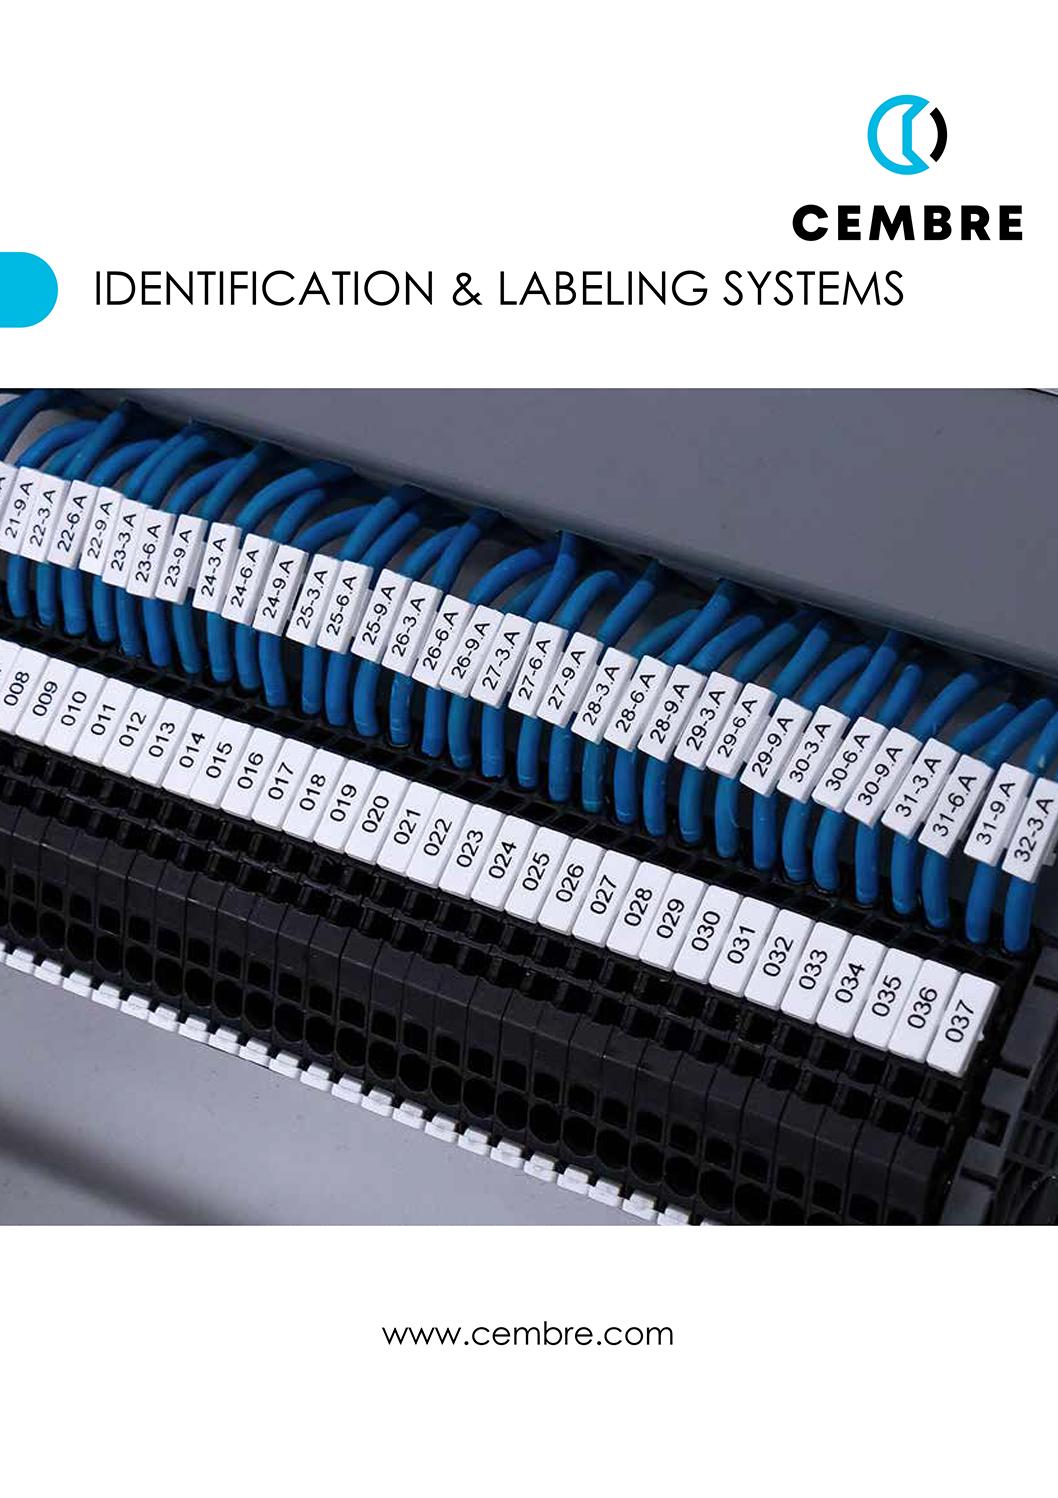 Cembre Identification and Labelling